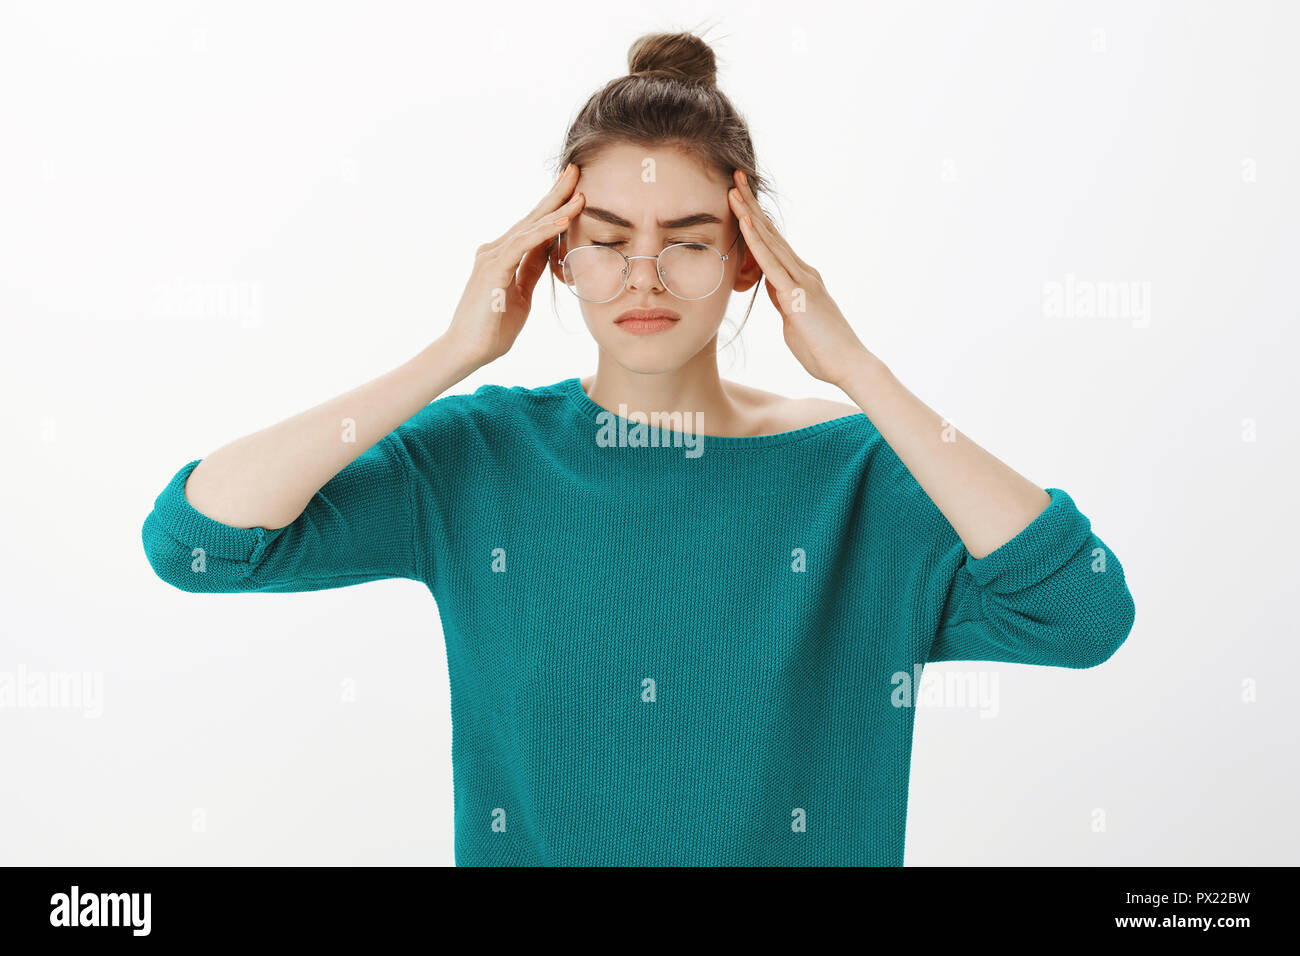 Just a sec, headache again. Portrait of intense gloomy and tired woman in casual outfit and glasses, closing eyes, touching temples and frowning while suffering migraine or painful feeling Stock Photo